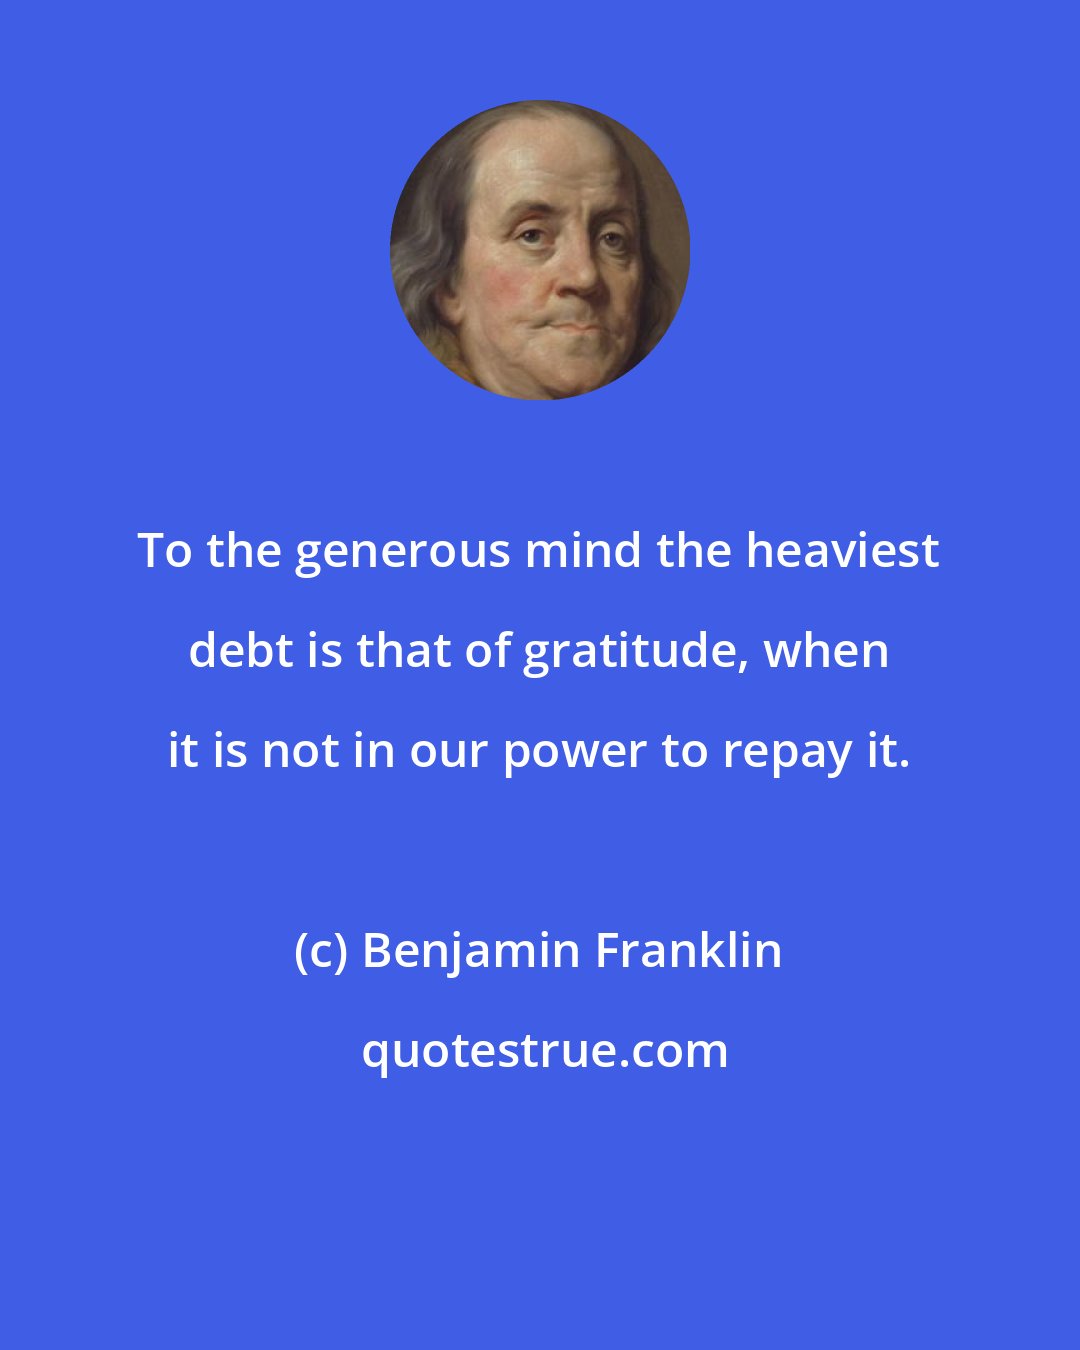 Benjamin Franklin: To the generous mind the heaviest debt is that of gratitude, when it is not in our power to repay it.